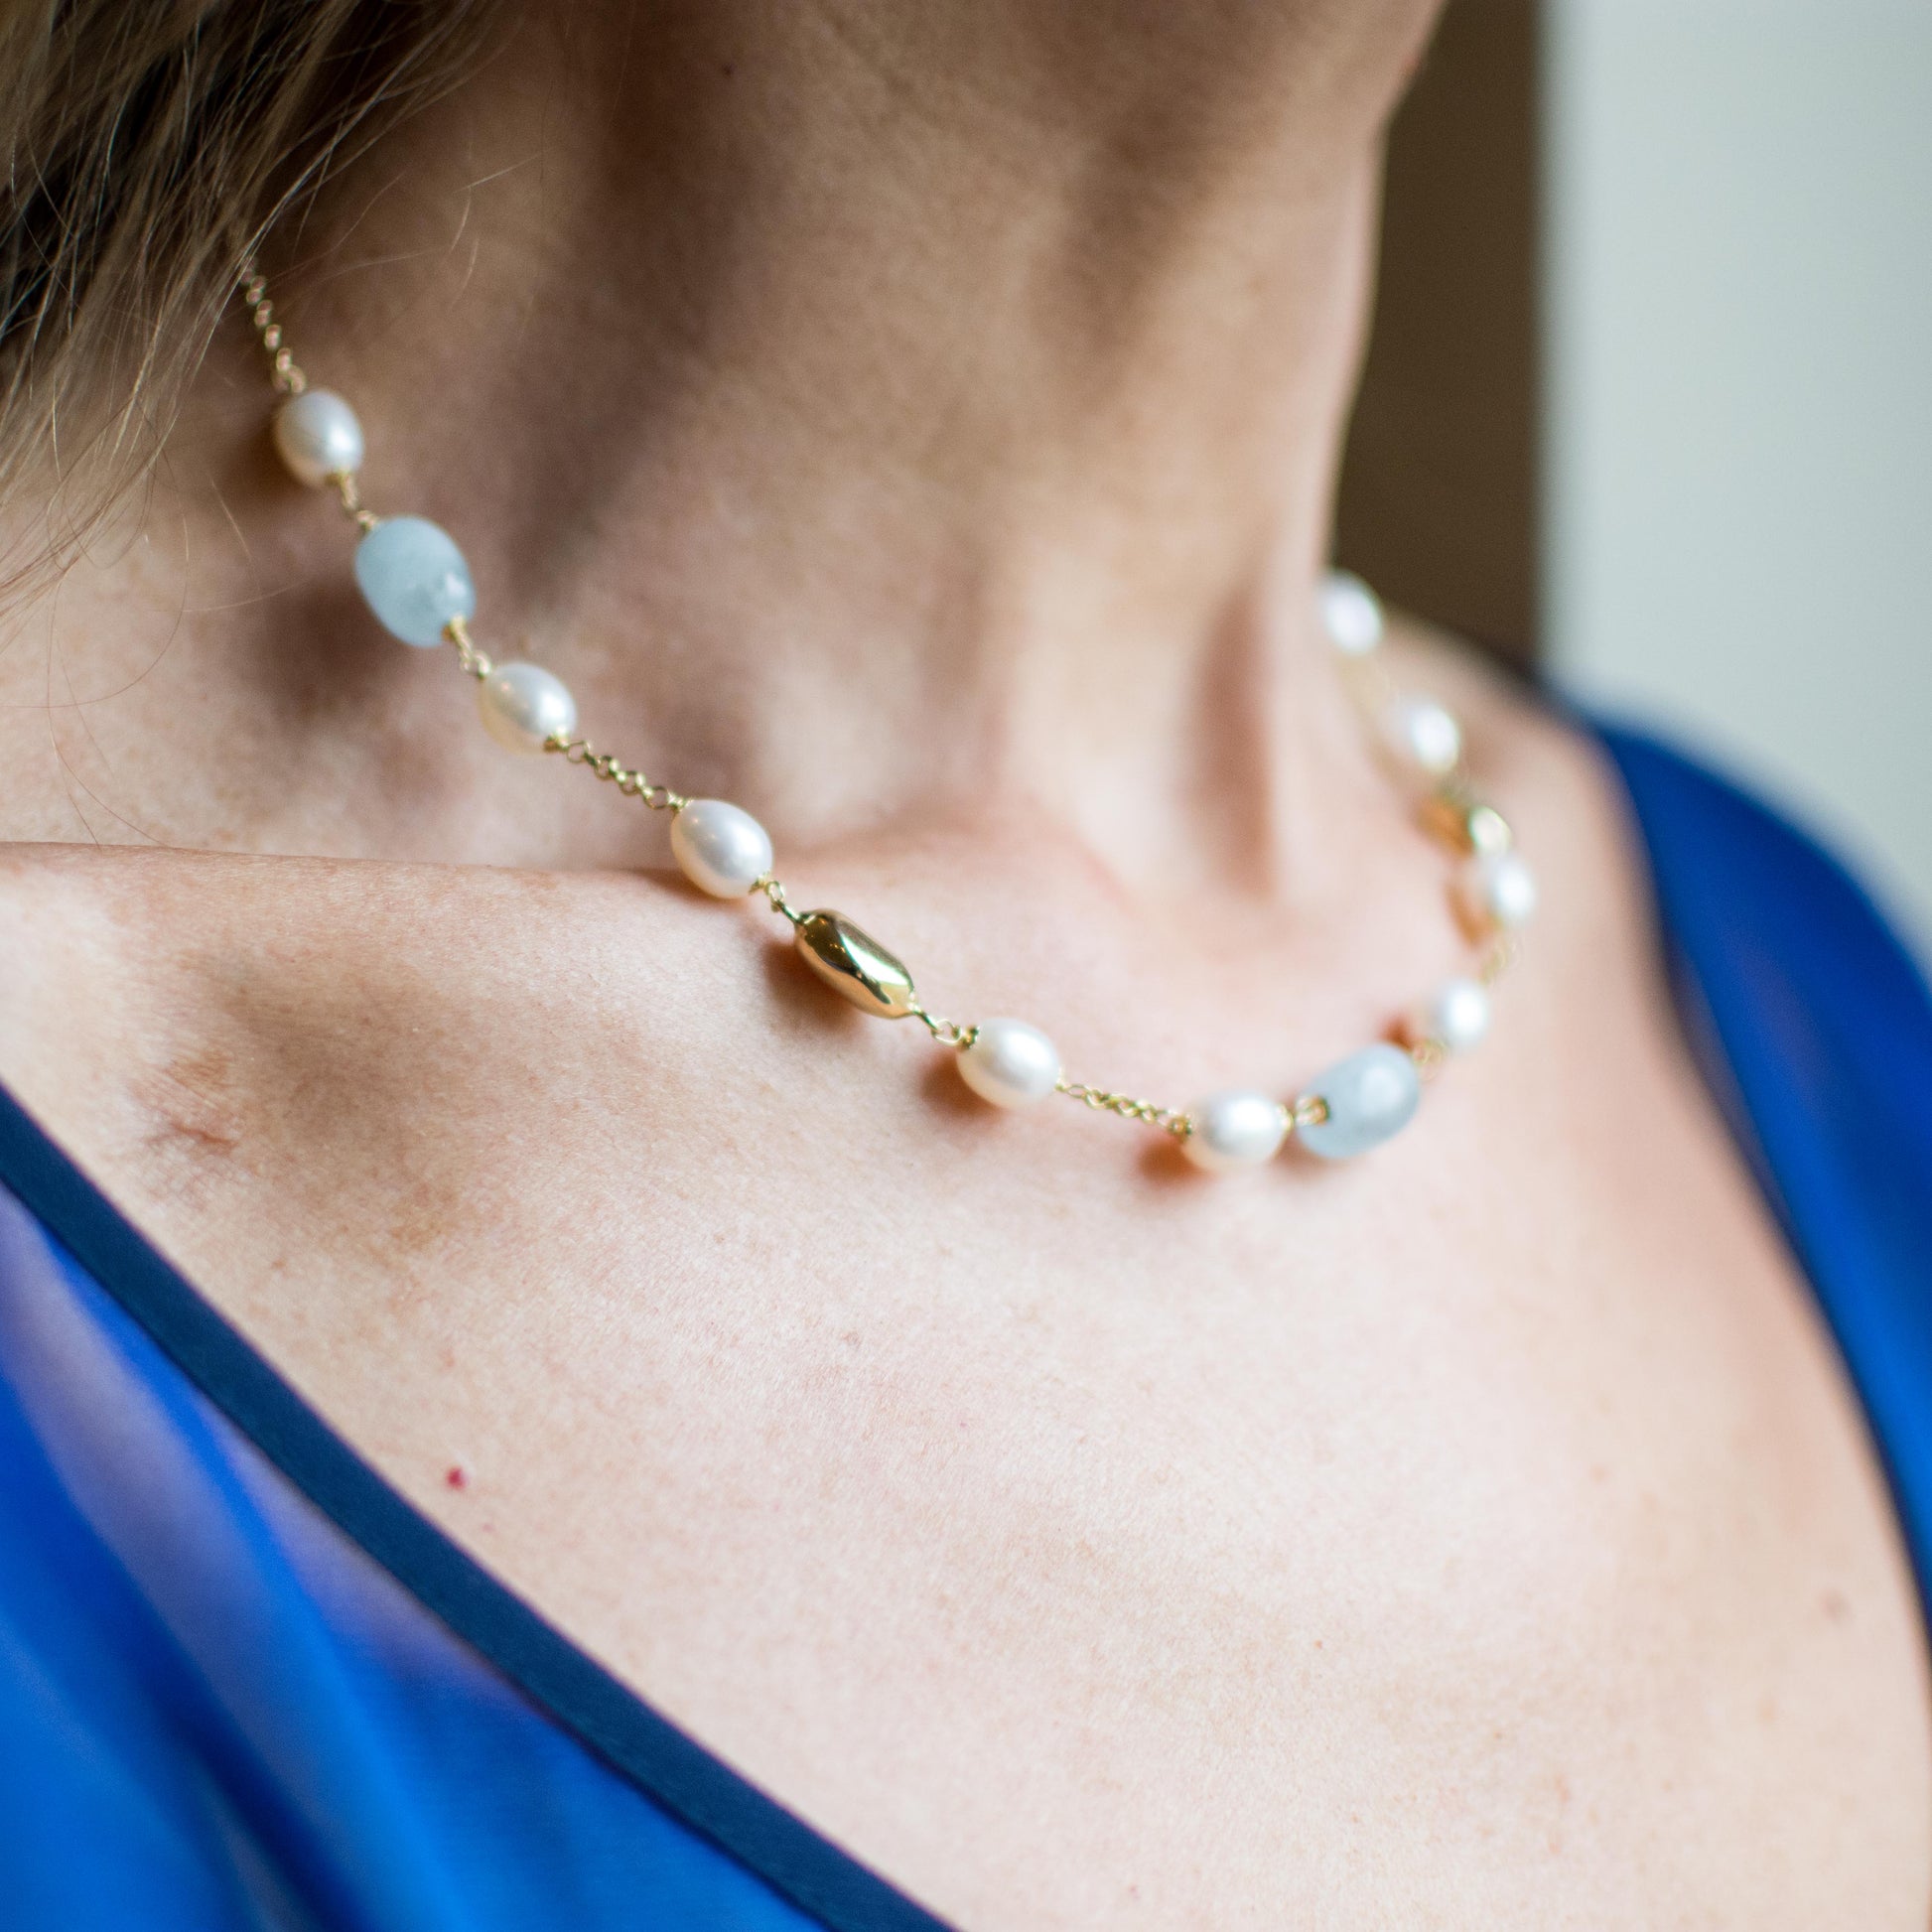 18ct Gold Silky Aquamarine and Cultured Freshwater Pearl Chain Necklace Pearl dimensions: 10mm x 8mm approximately Silky Aquamarine dimensions: 12mm x 10mm approximately 43cm long 18ct yellow gold This item can be ordered in a variety of lengths.  Please contact us for custom requirements.